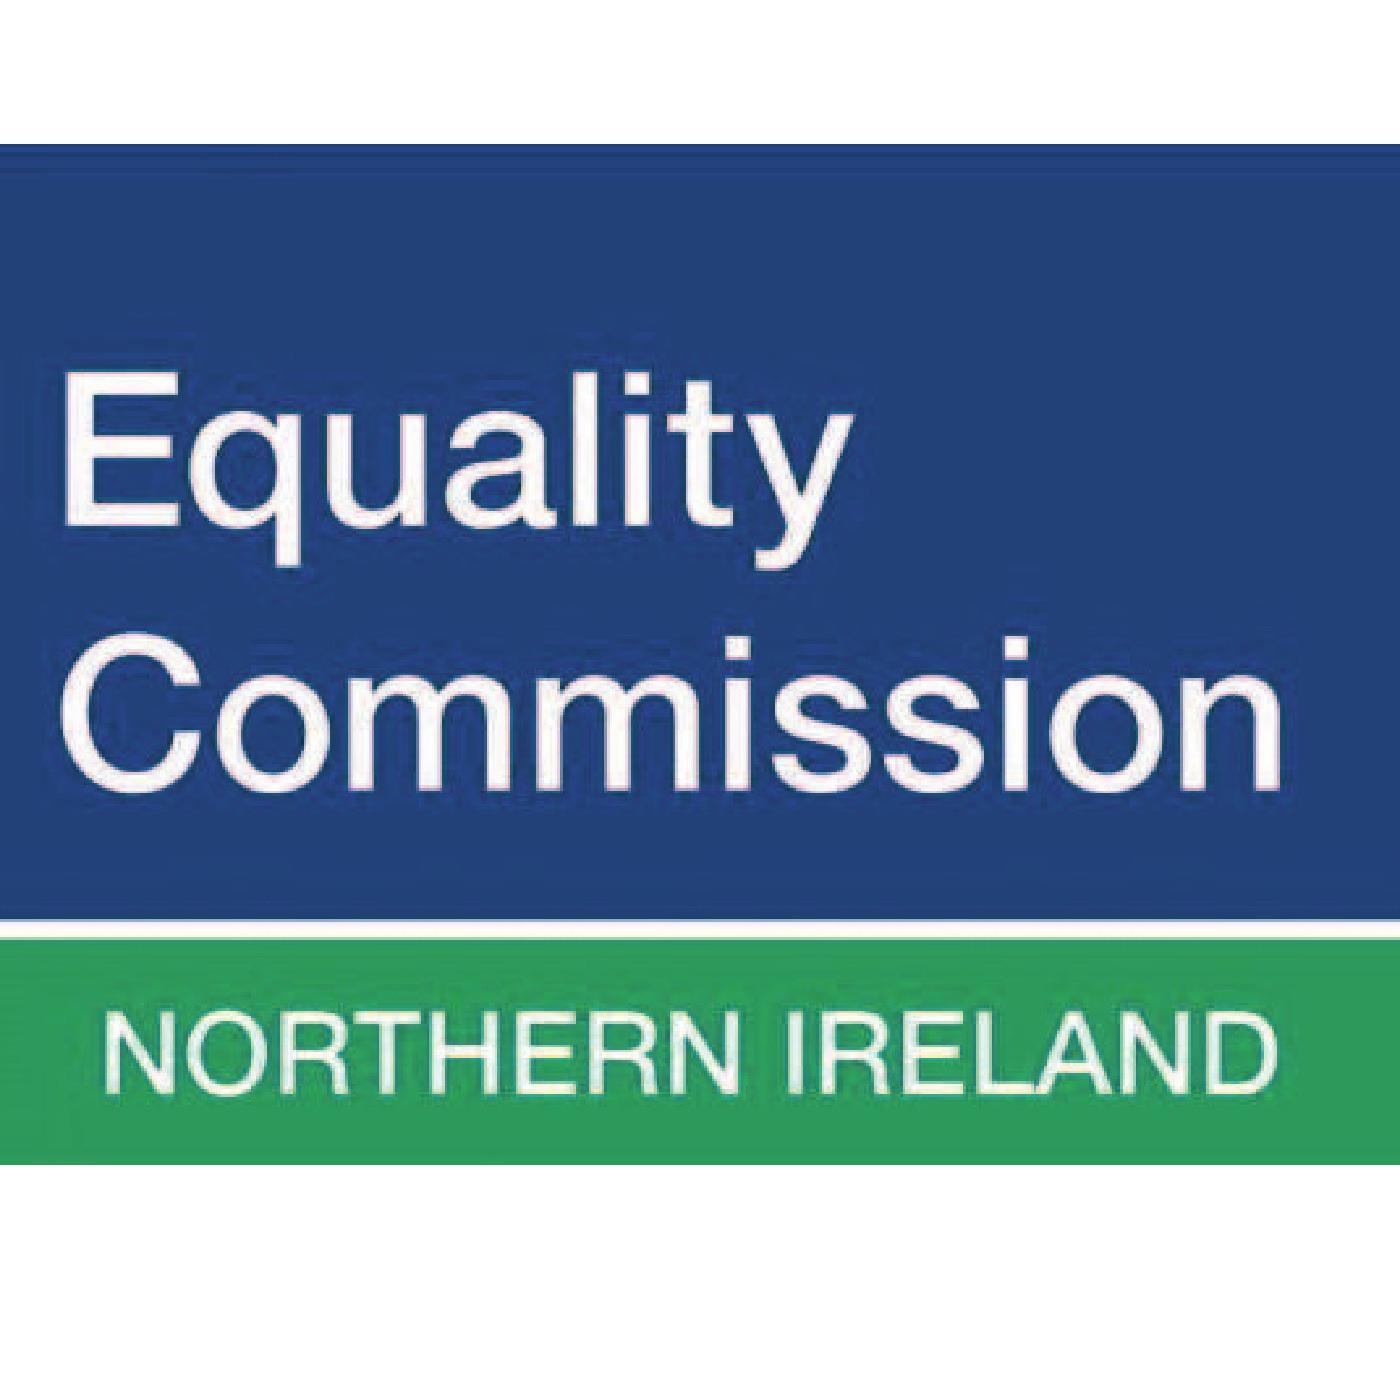 The Equality Commission for Northern Ireland podcast